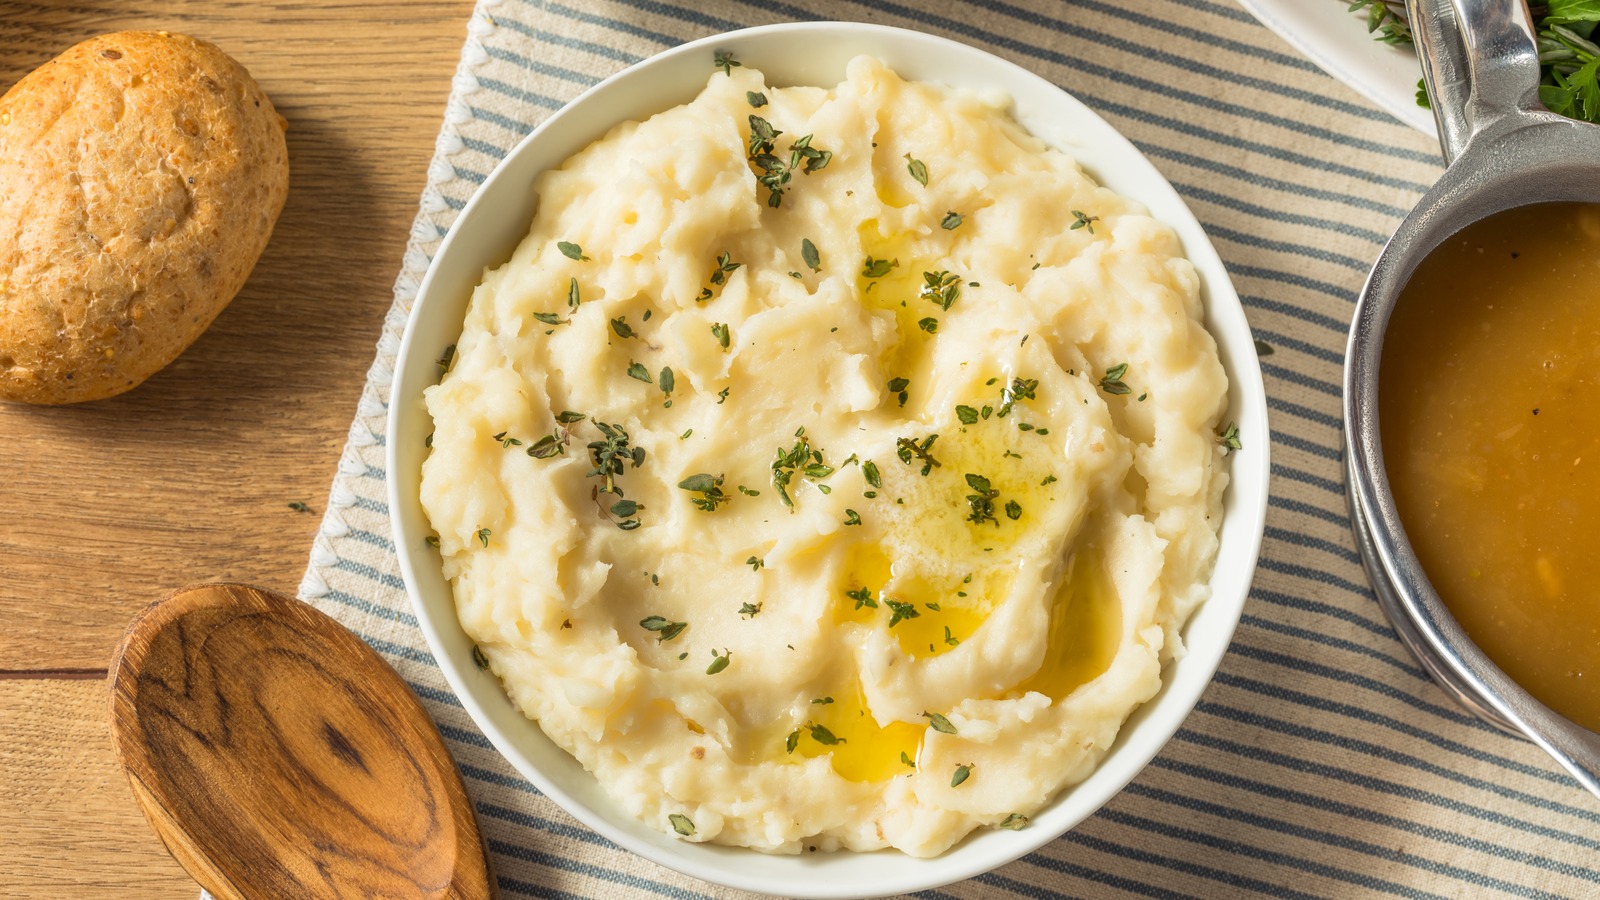 https://www.chowhound.com/img/gallery/13-secrets-to-make-your-mashed-potatoes-taste-even-better/l-intro-1702920825.jpg